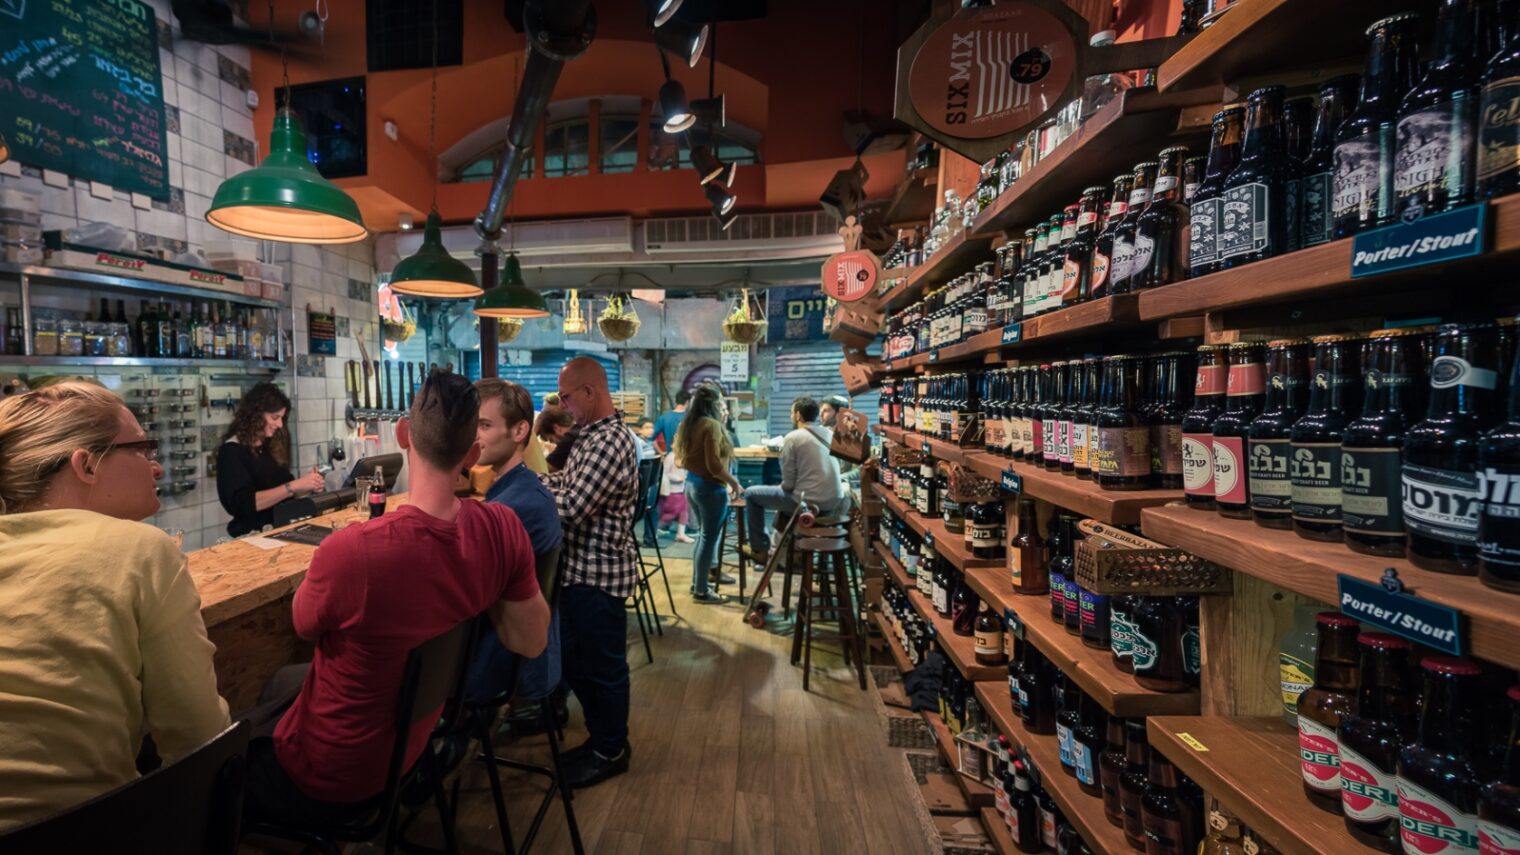 More than 100 Israeli craft beers are sold at Beer Bazaar in Jerusalem. Photo: courtesy